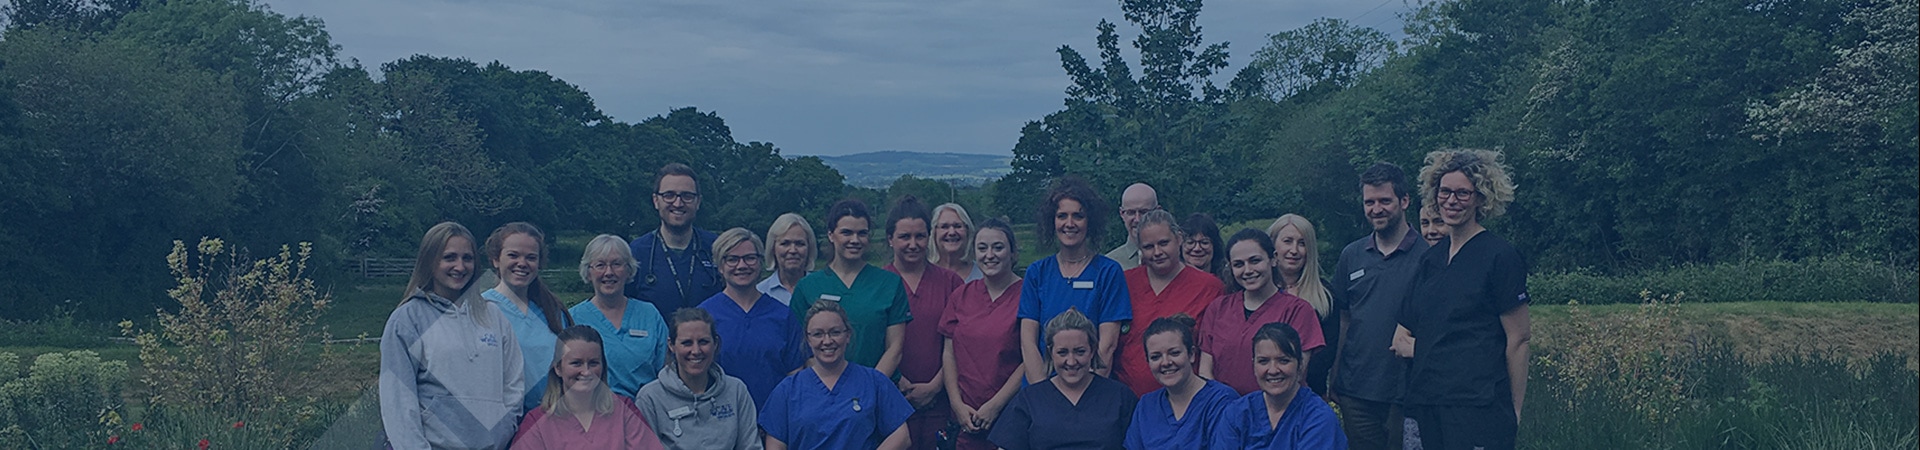 Oncology Team | Cave Veterinary Specialists